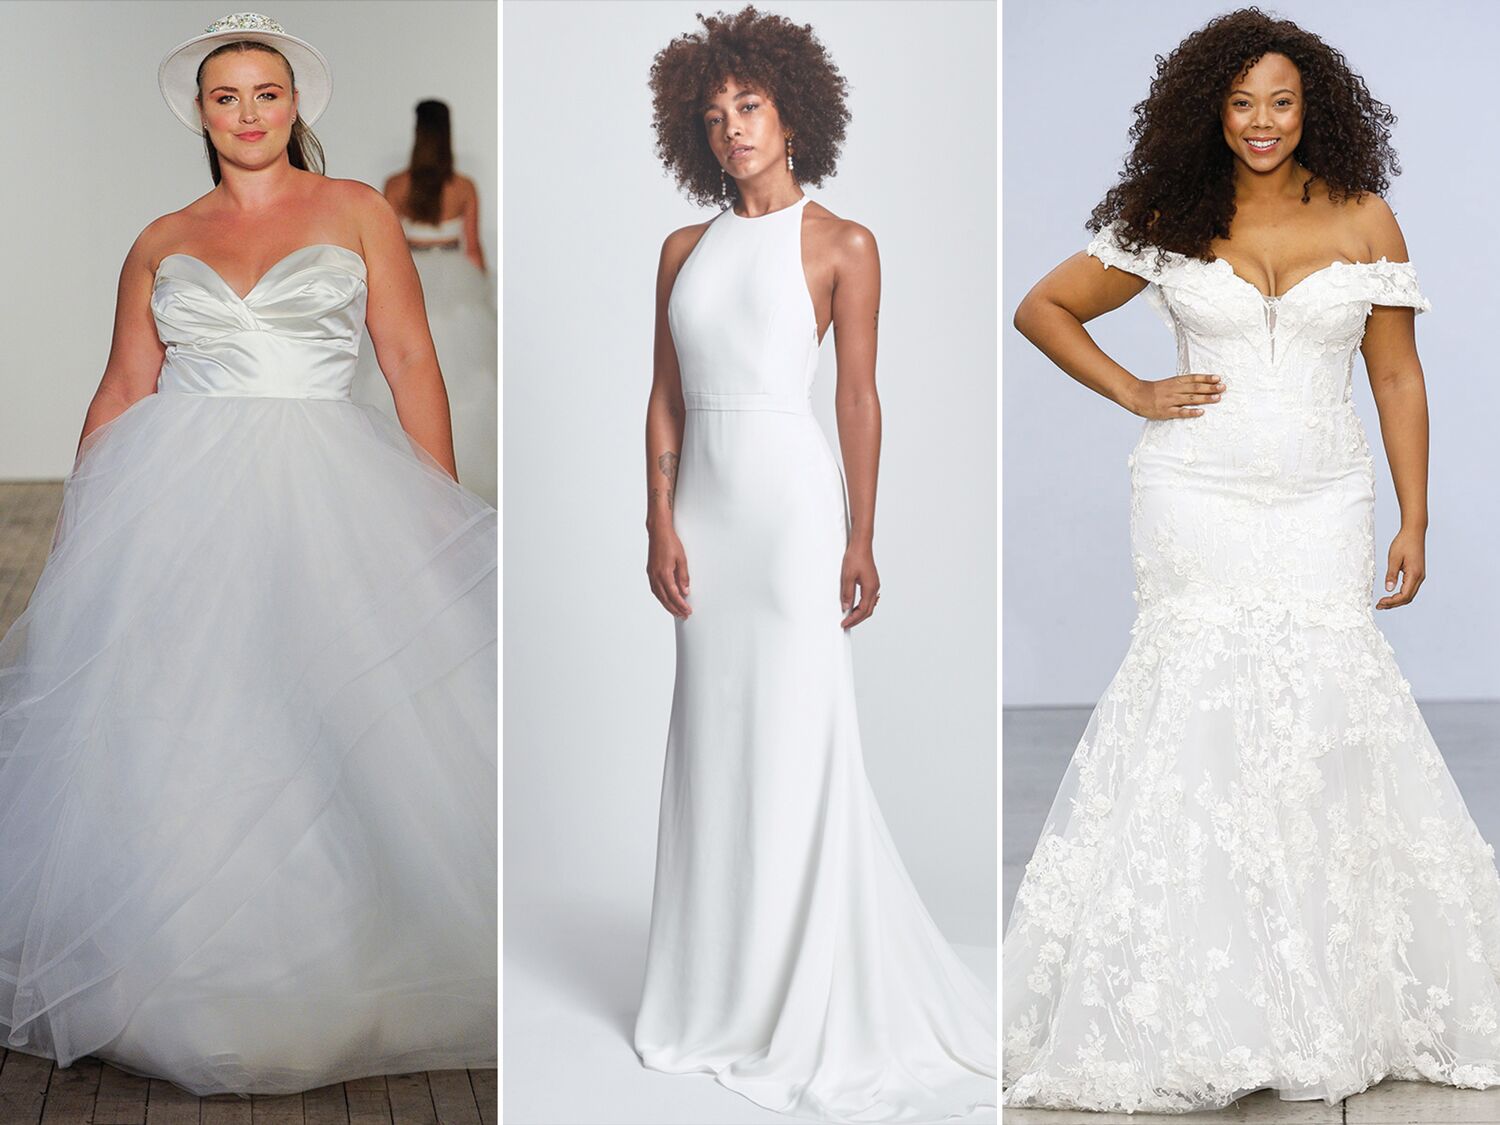 Wedding Dress Silhouettes: What Are The 